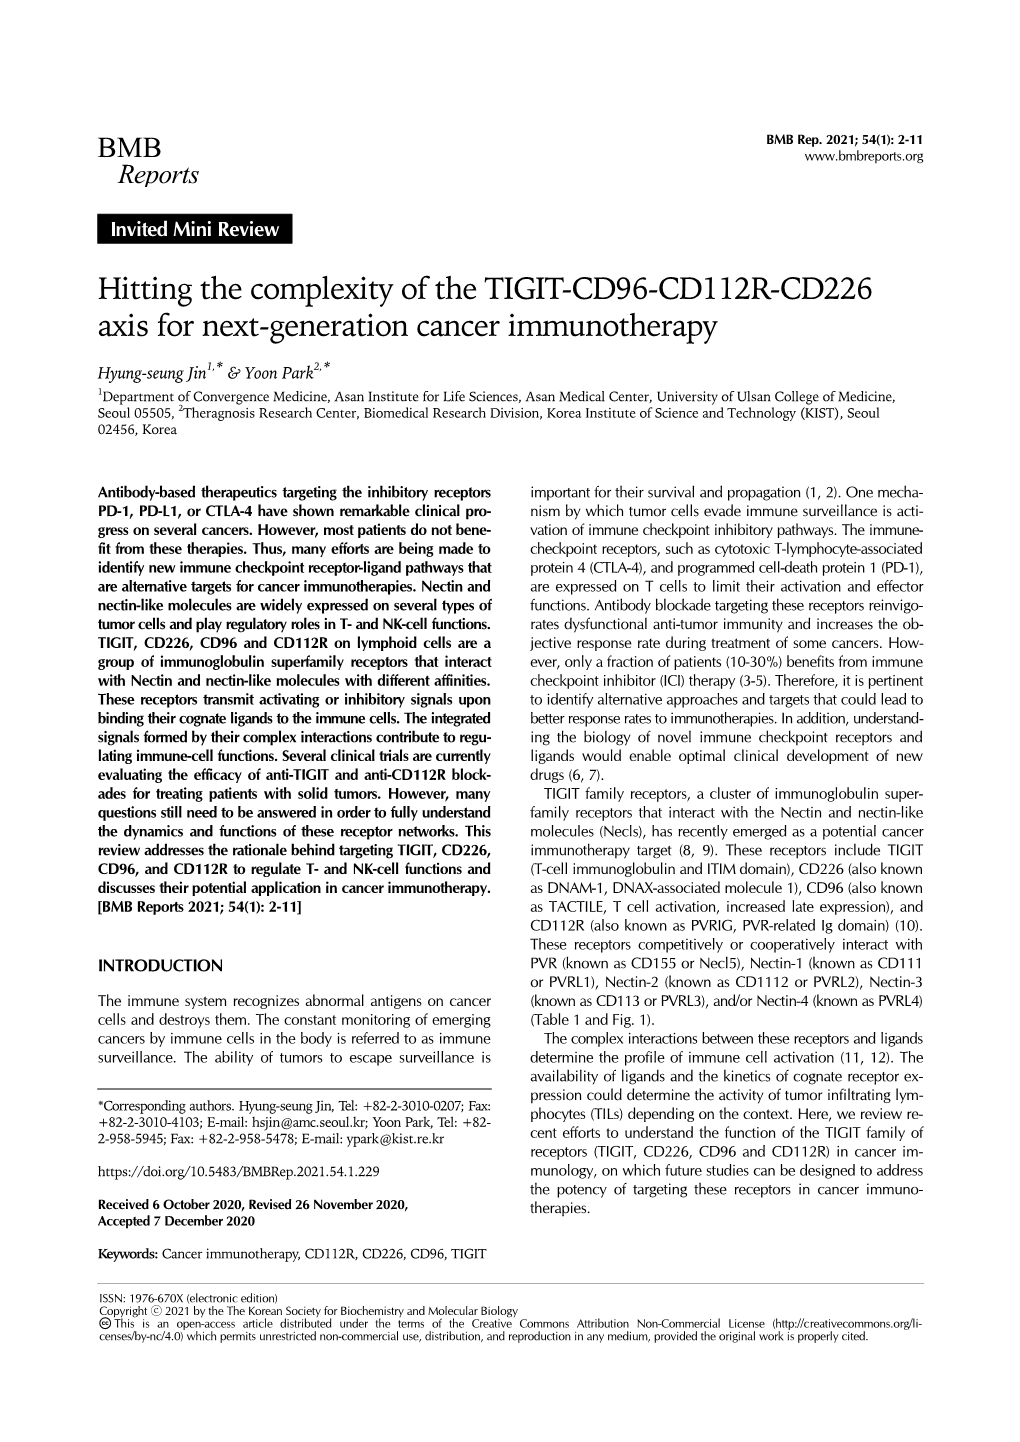 Hitting the Complexity of the TIGIT-CD96-CD112R-CD226 Axis for Next-Generation Cancer Immunotherapy